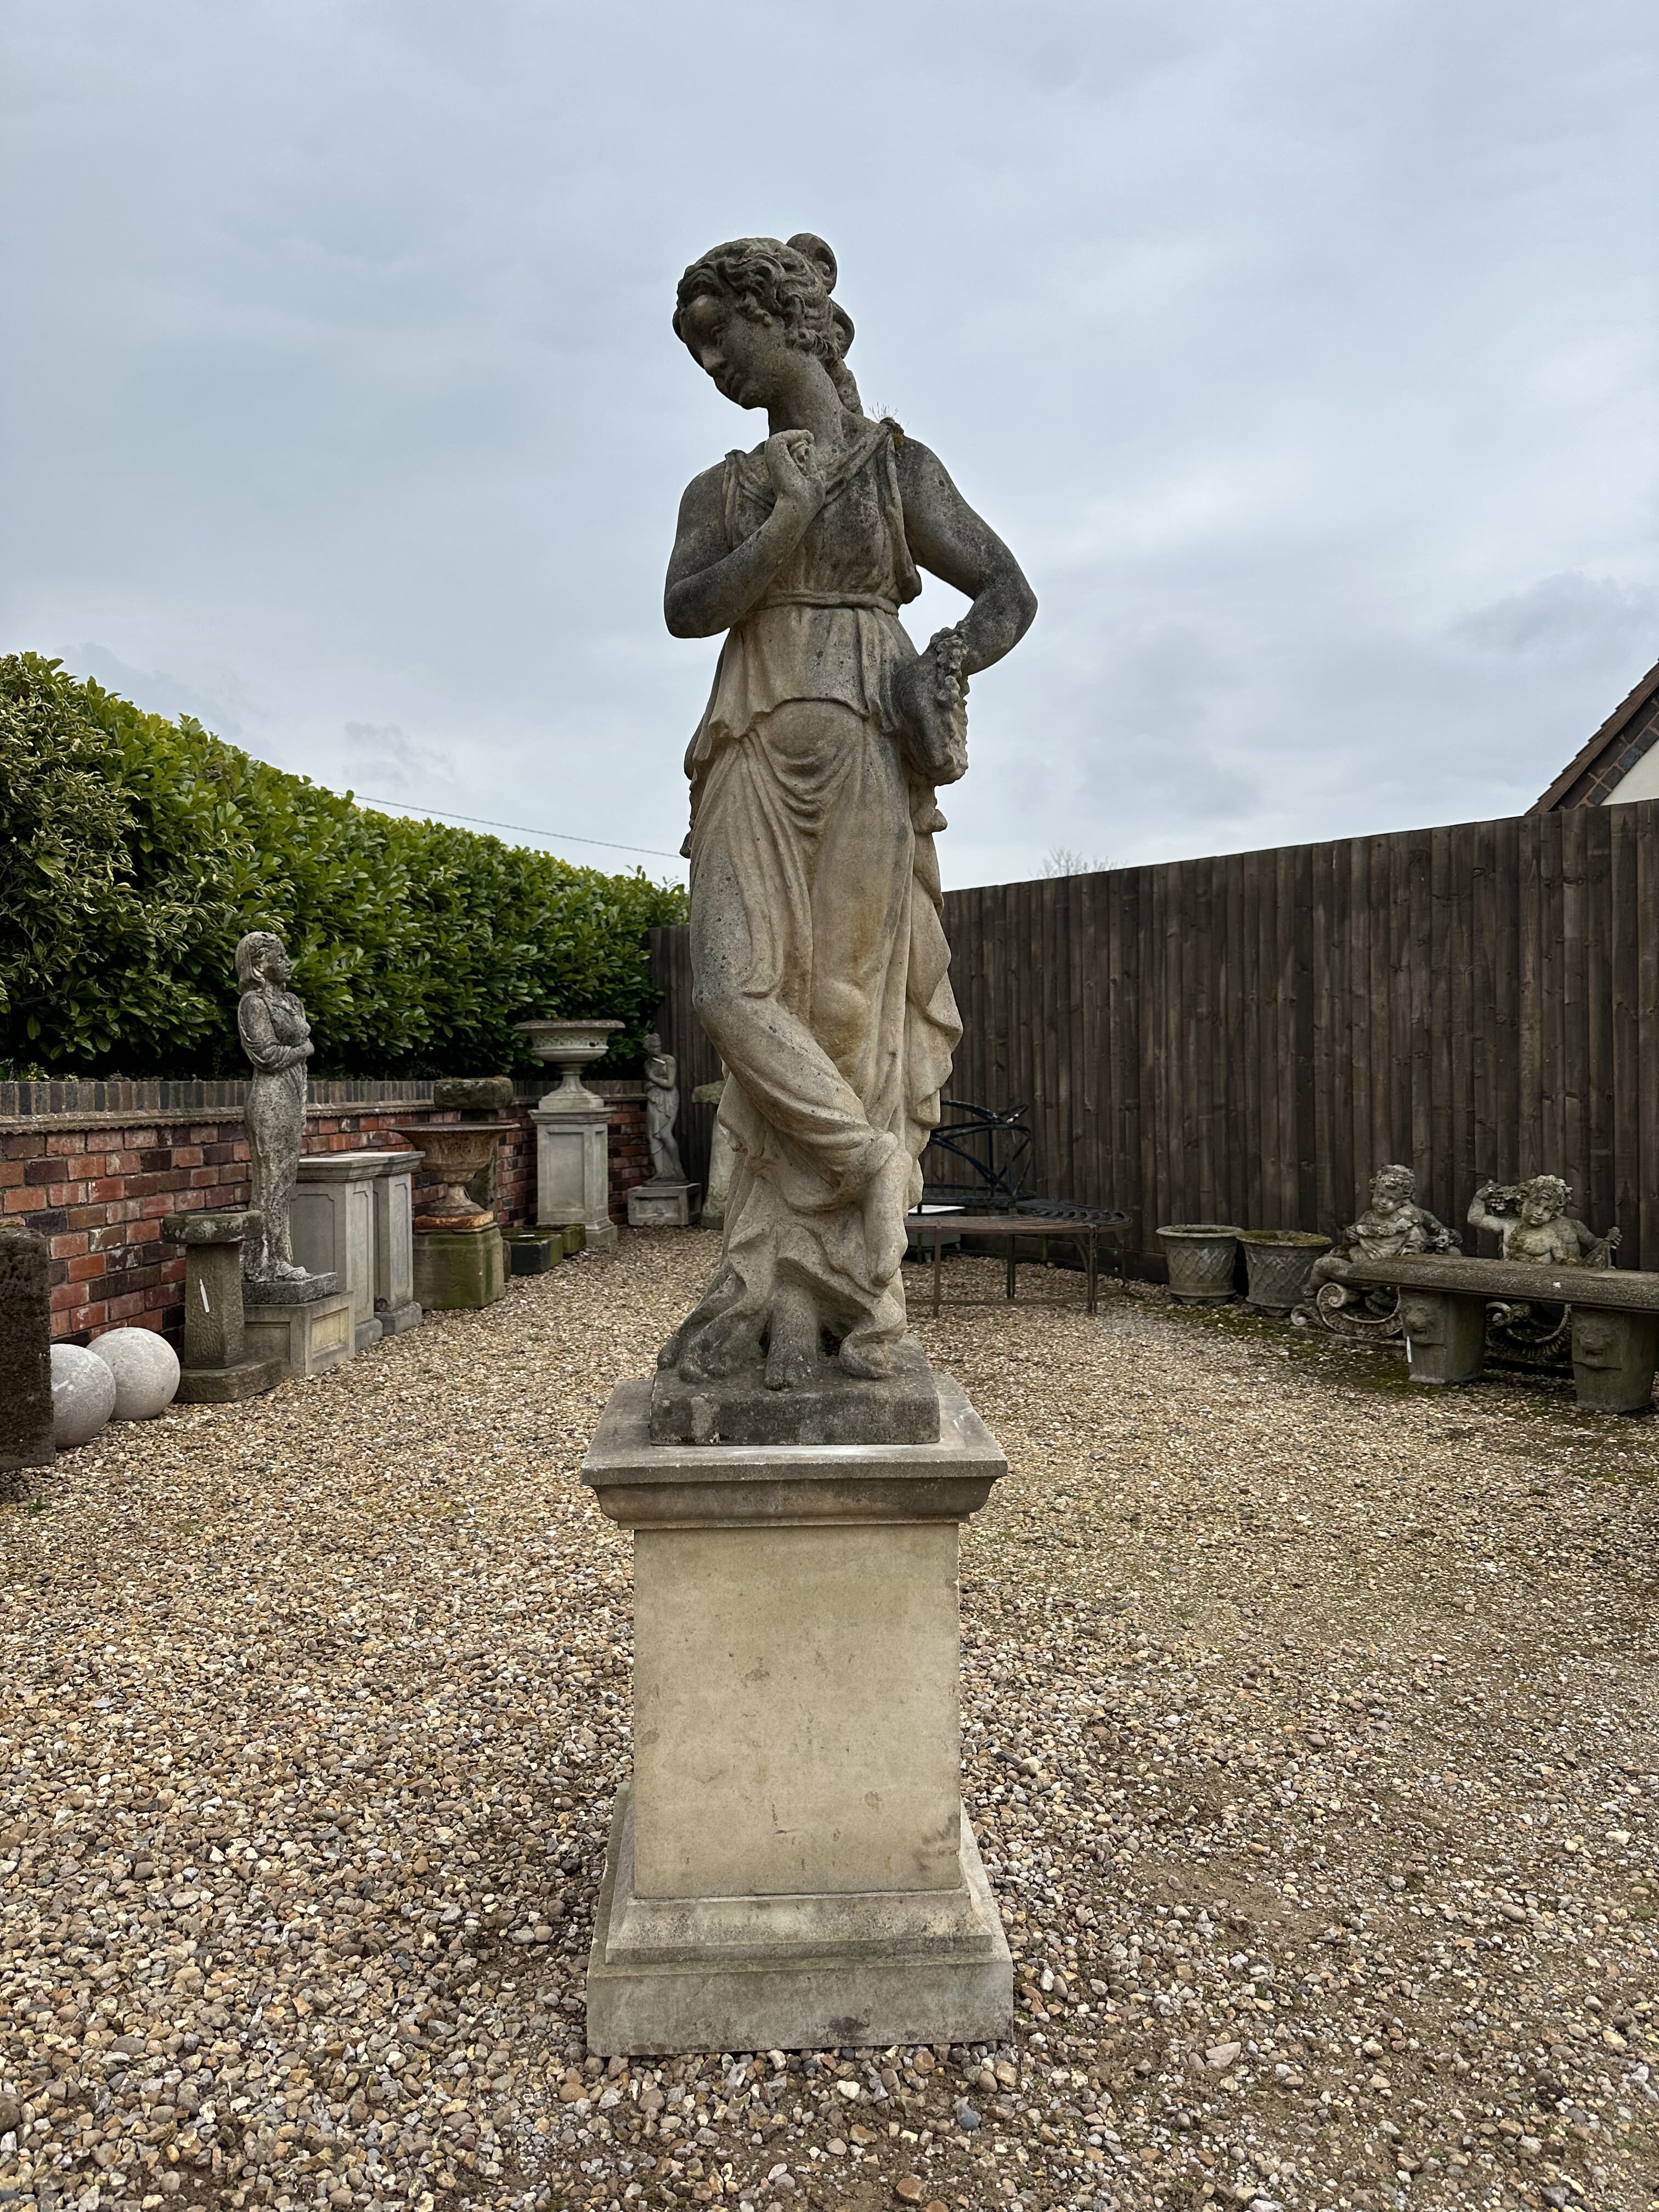 Antique Garden Statues Available To Purchase At UKAA. Genuine Garden Antiques